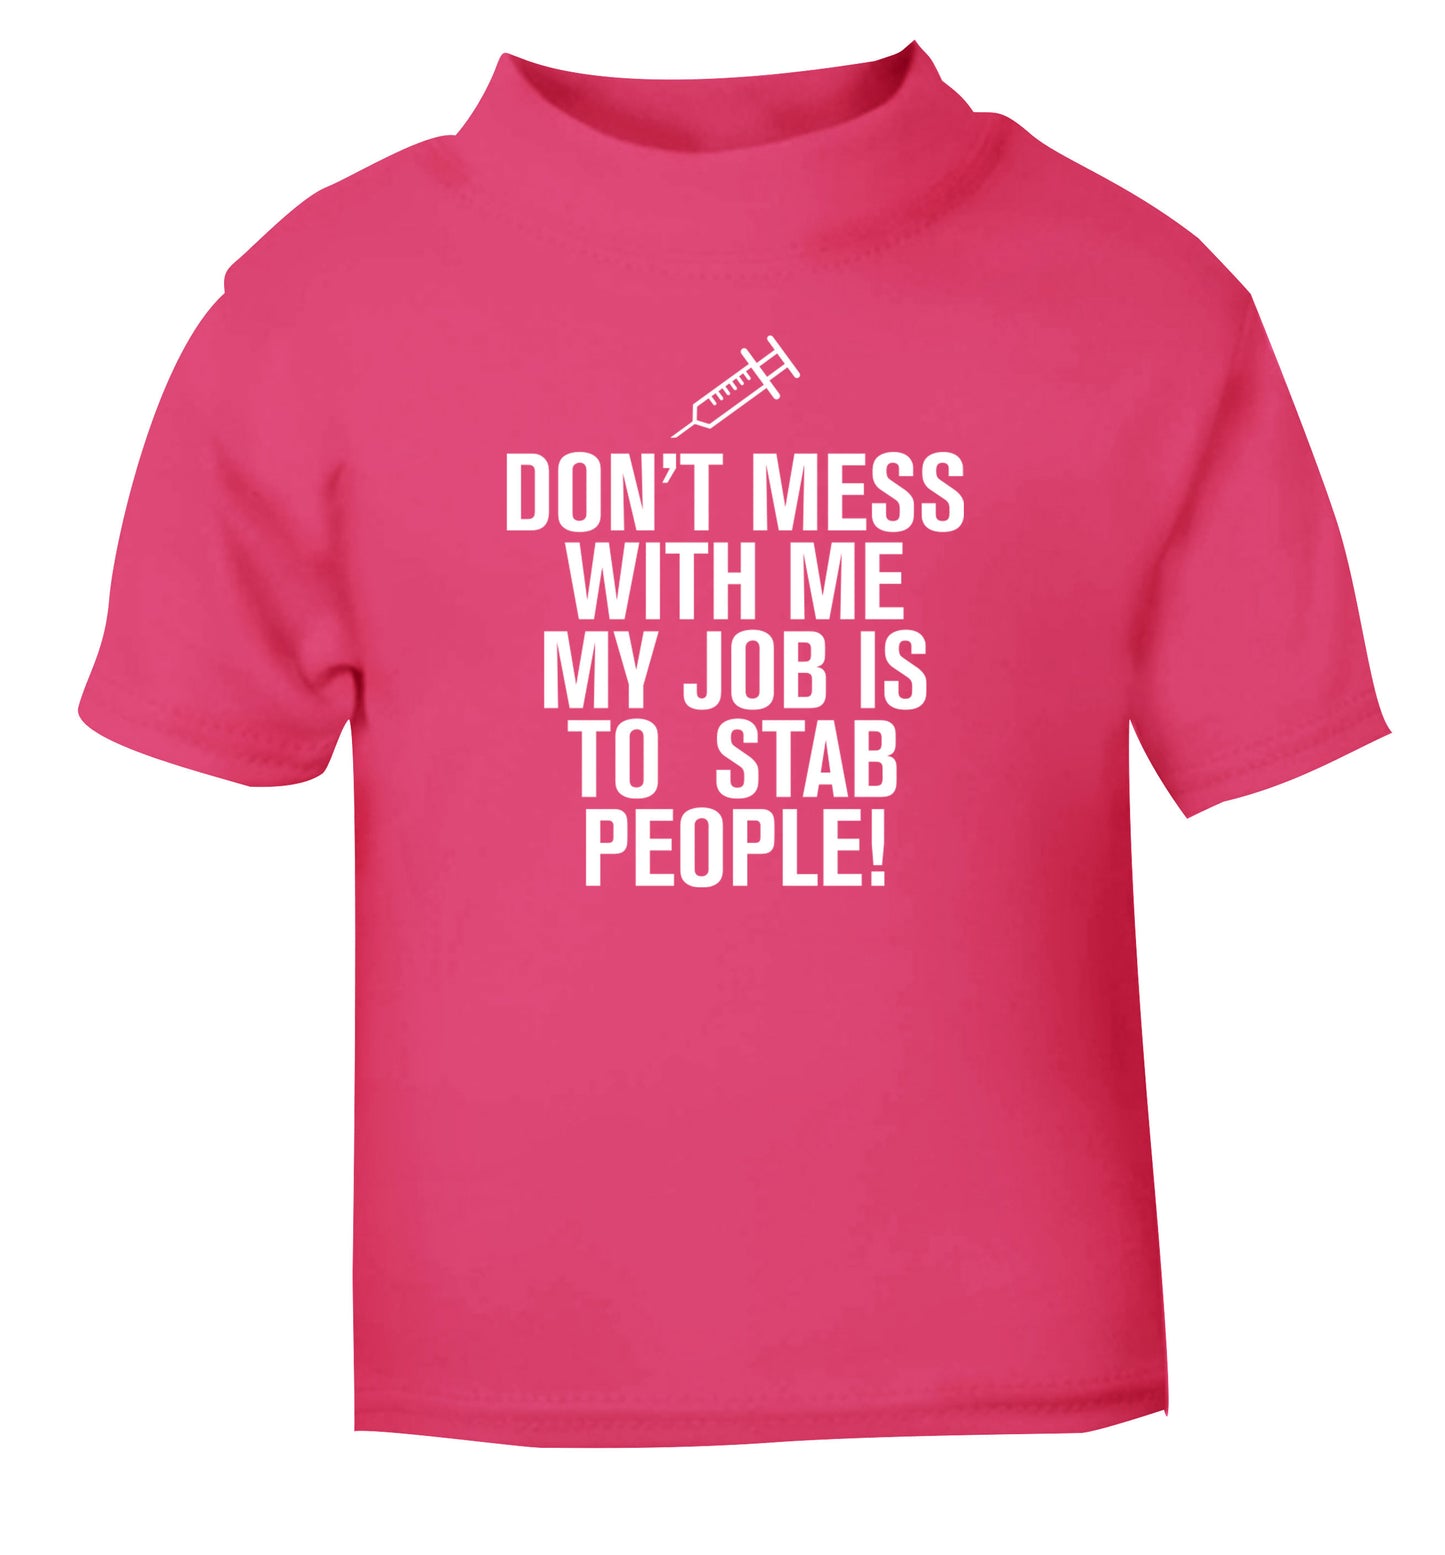 Don't mess with me my job is to stab people! pink Baby Toddler Tshirt 2 Years